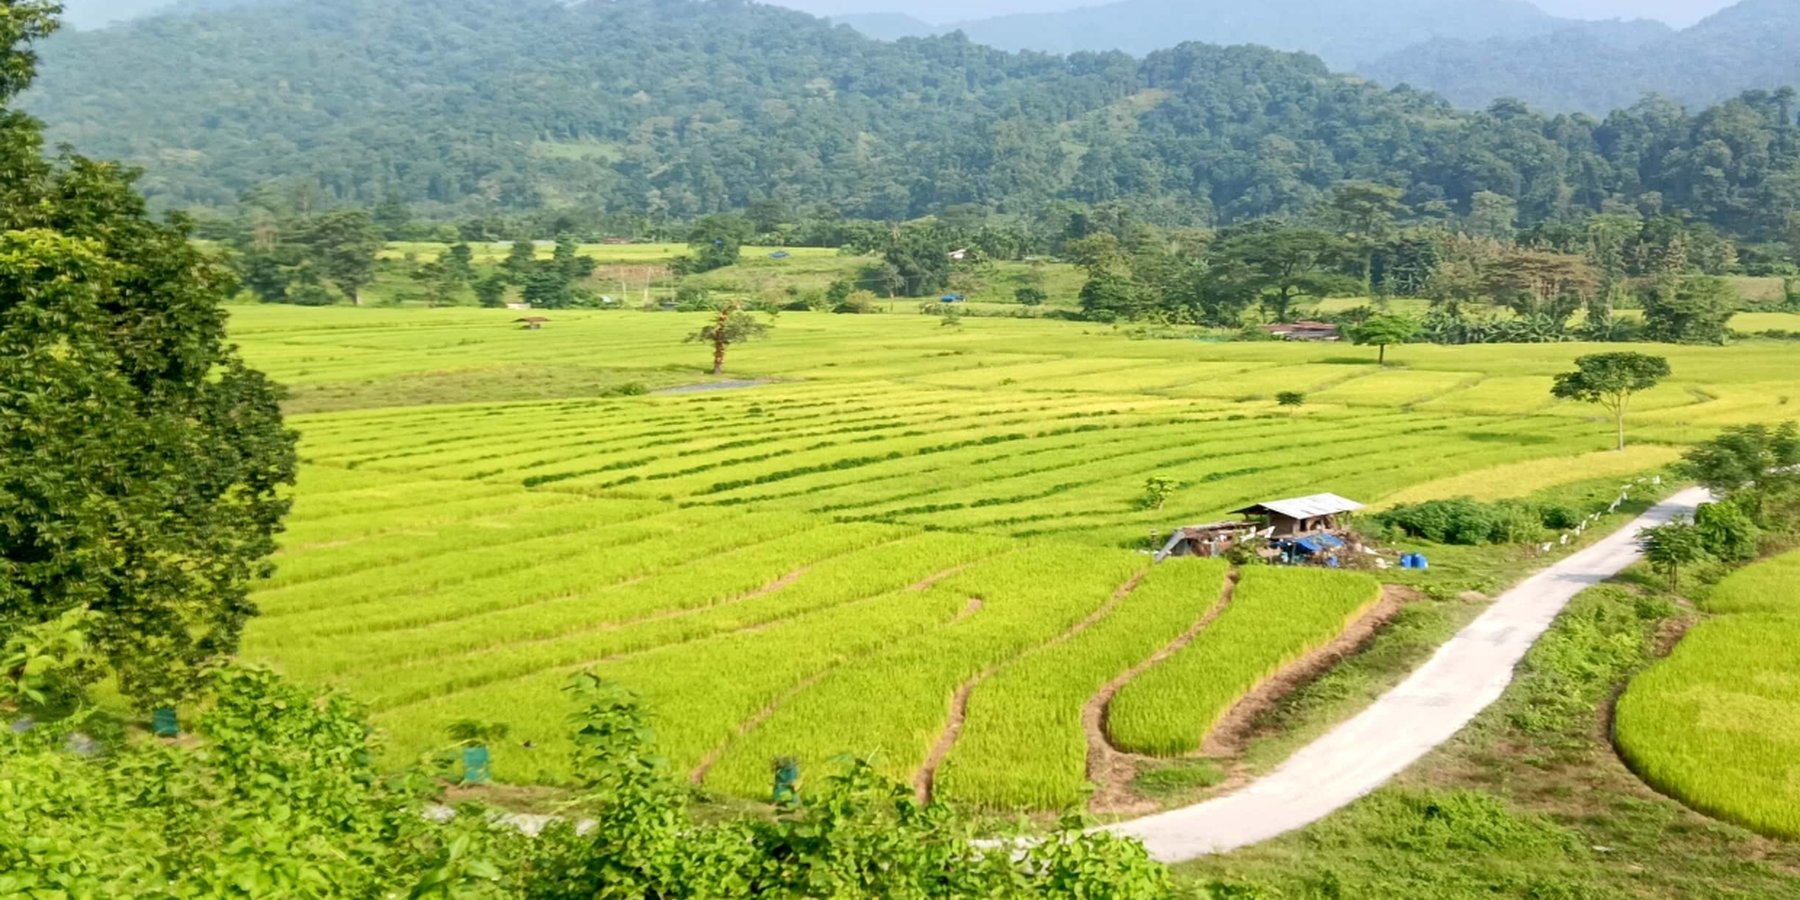 Rice field in the fenced area